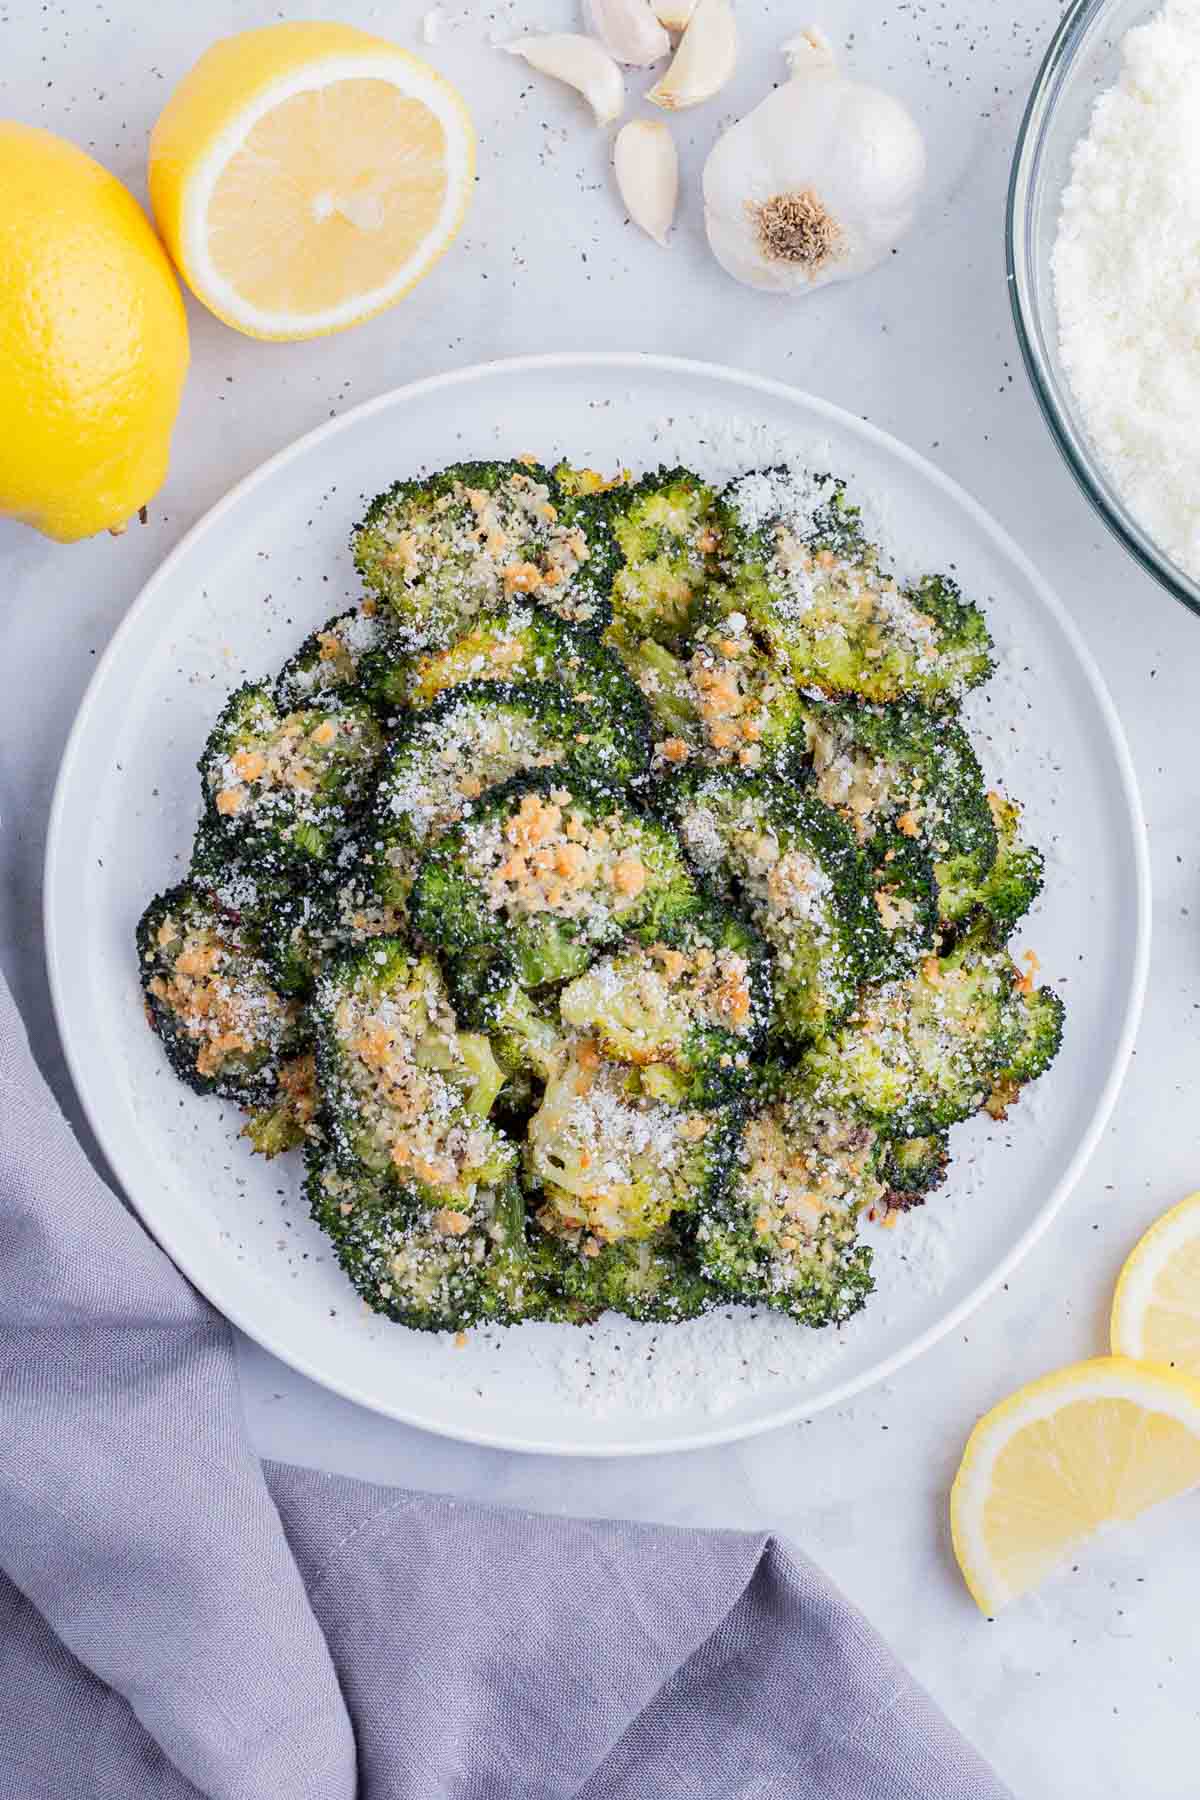 Smashed broccoli with Parmesan is served on a white plate.